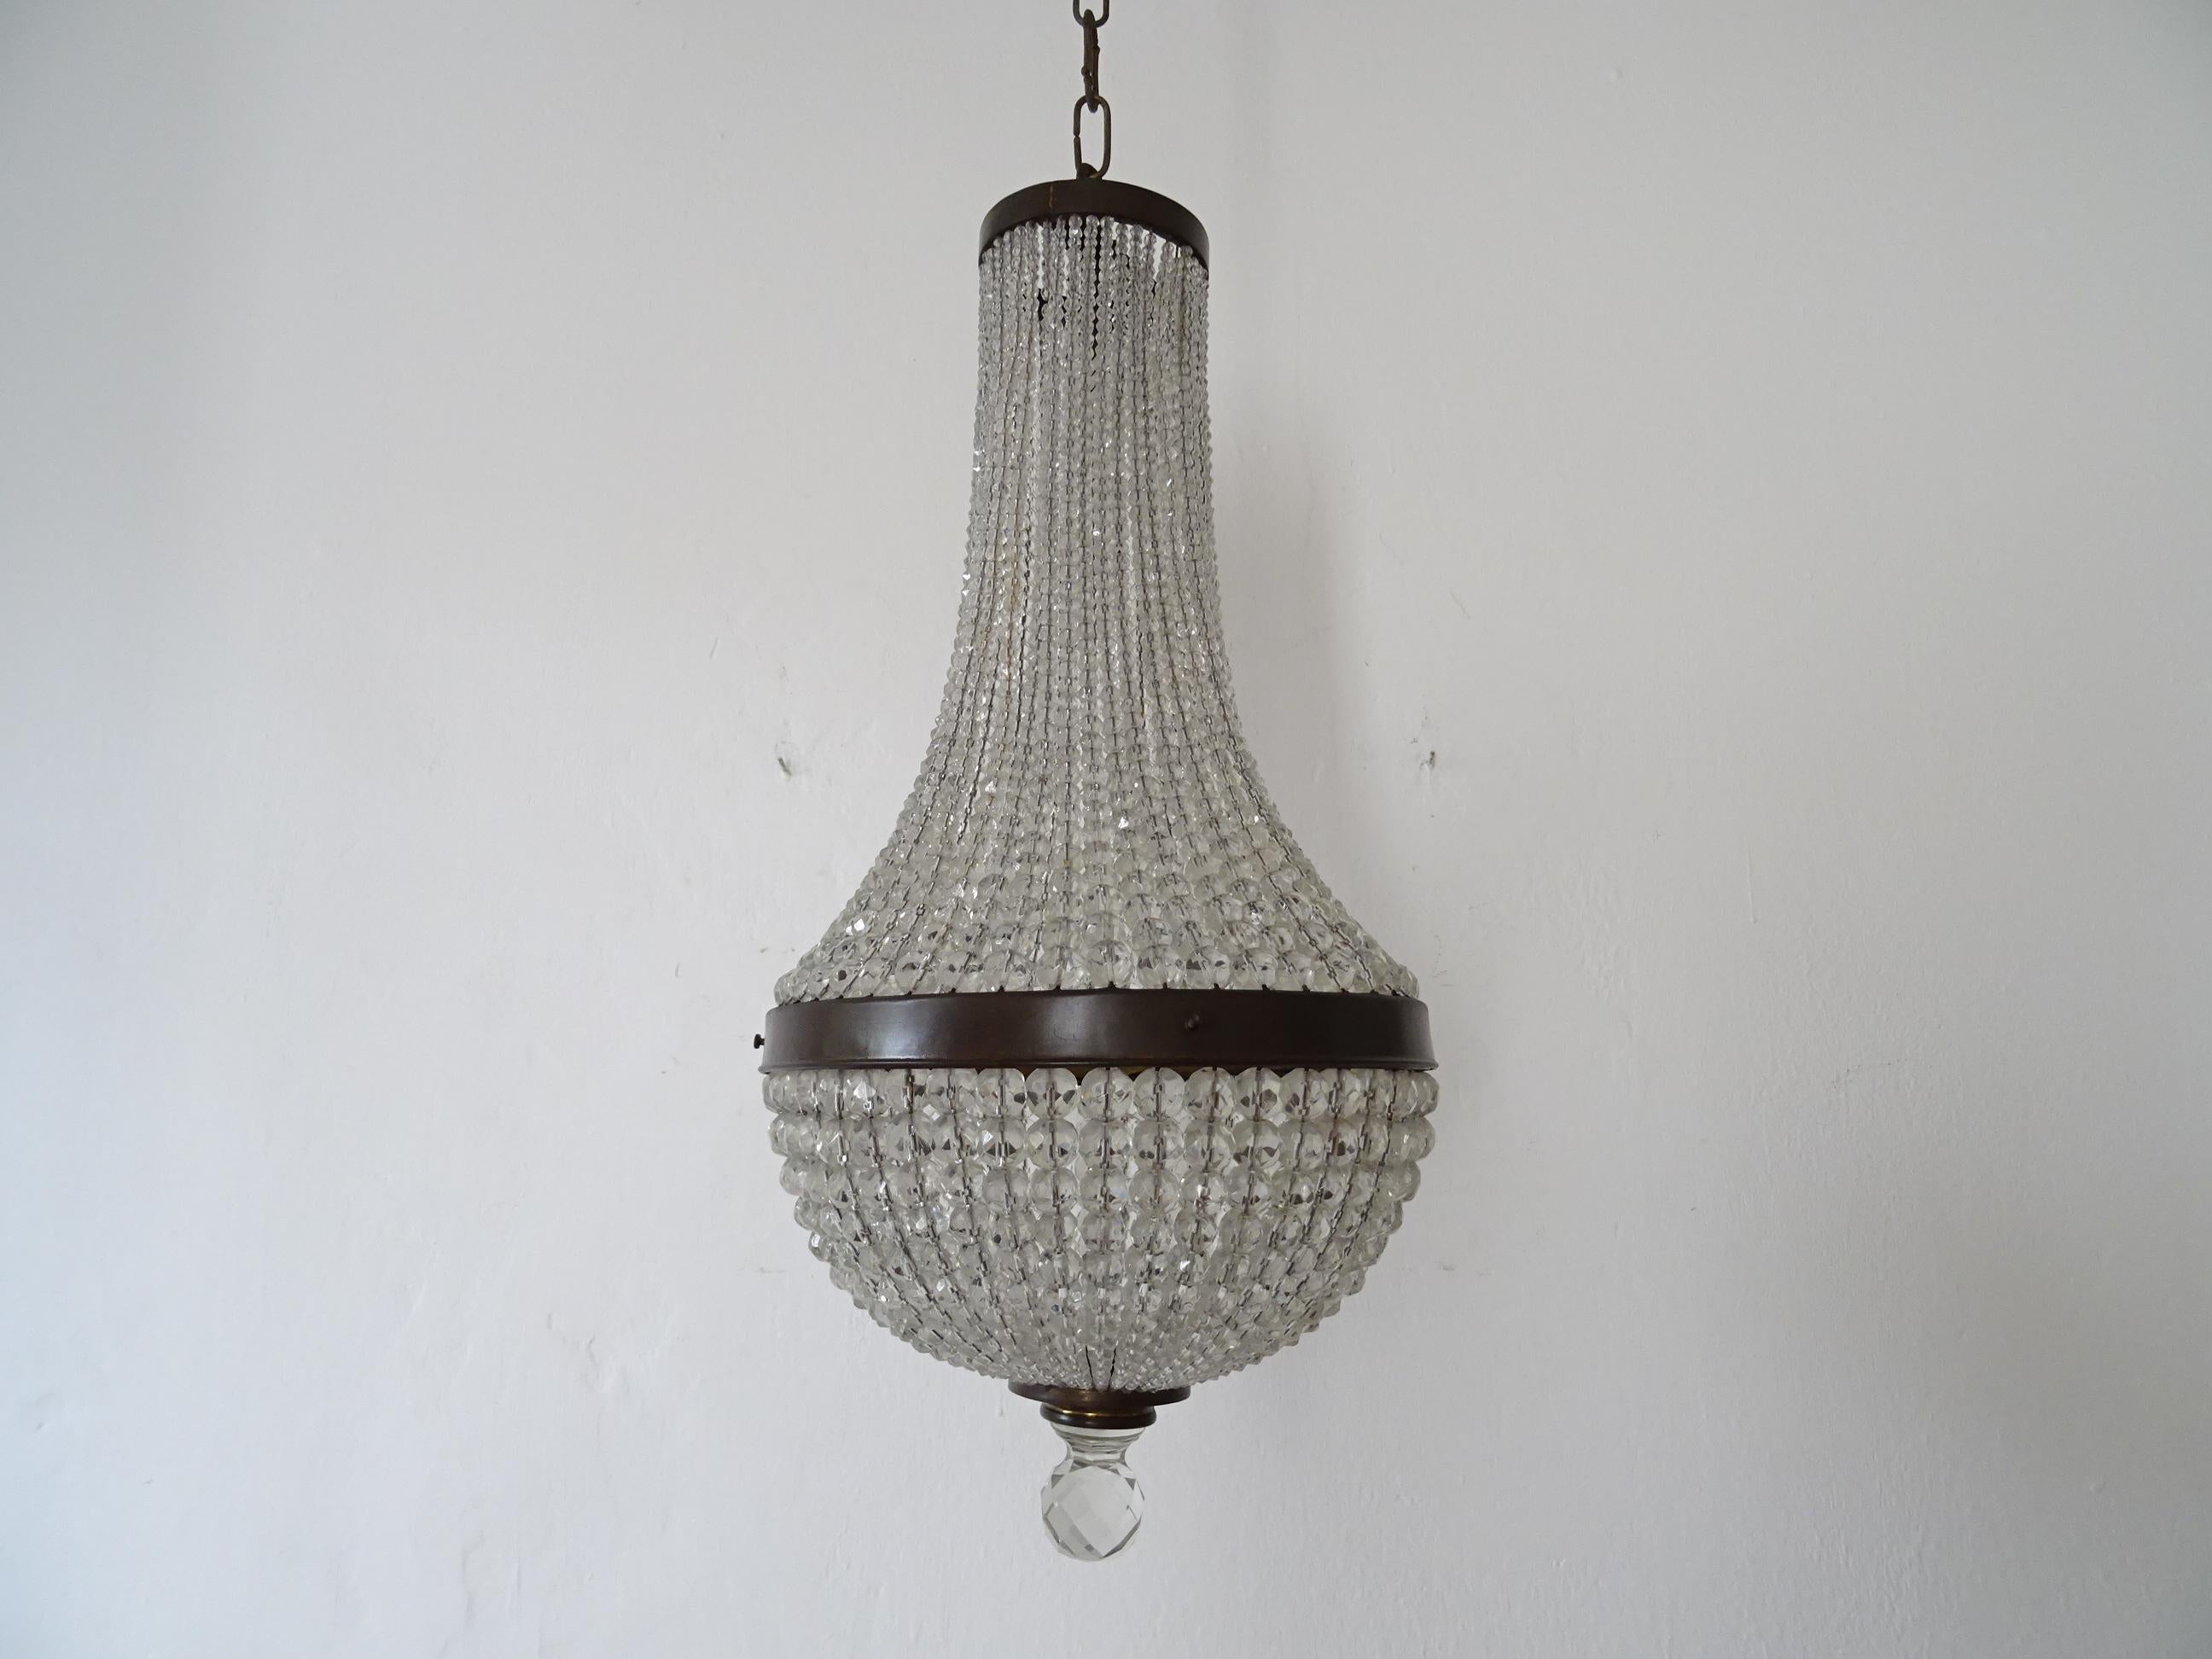 Housing one light, rewired and ready to hang. We use certified UL US sockets and appropriate sockets for all other countries. Strands and strands of crystal beads with crystal finial on bottom. Adding another 15 inches of original chain and canopy.